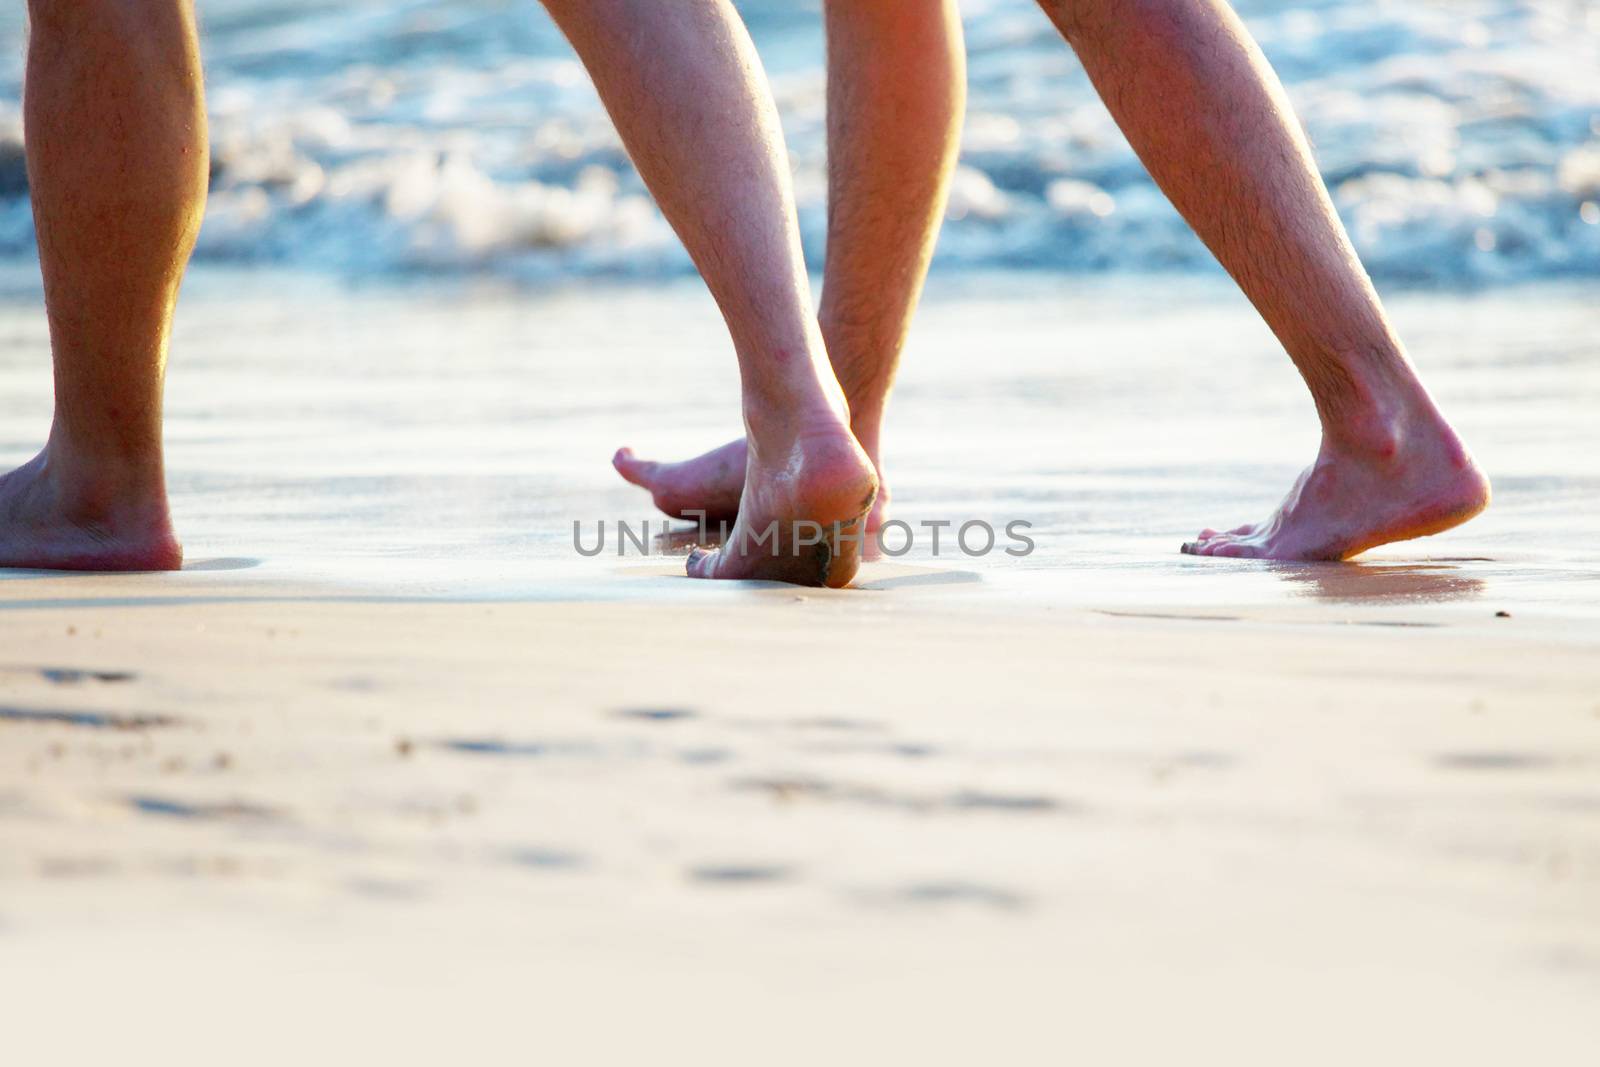 Two People walking on sandy beach, seaside vacation concept